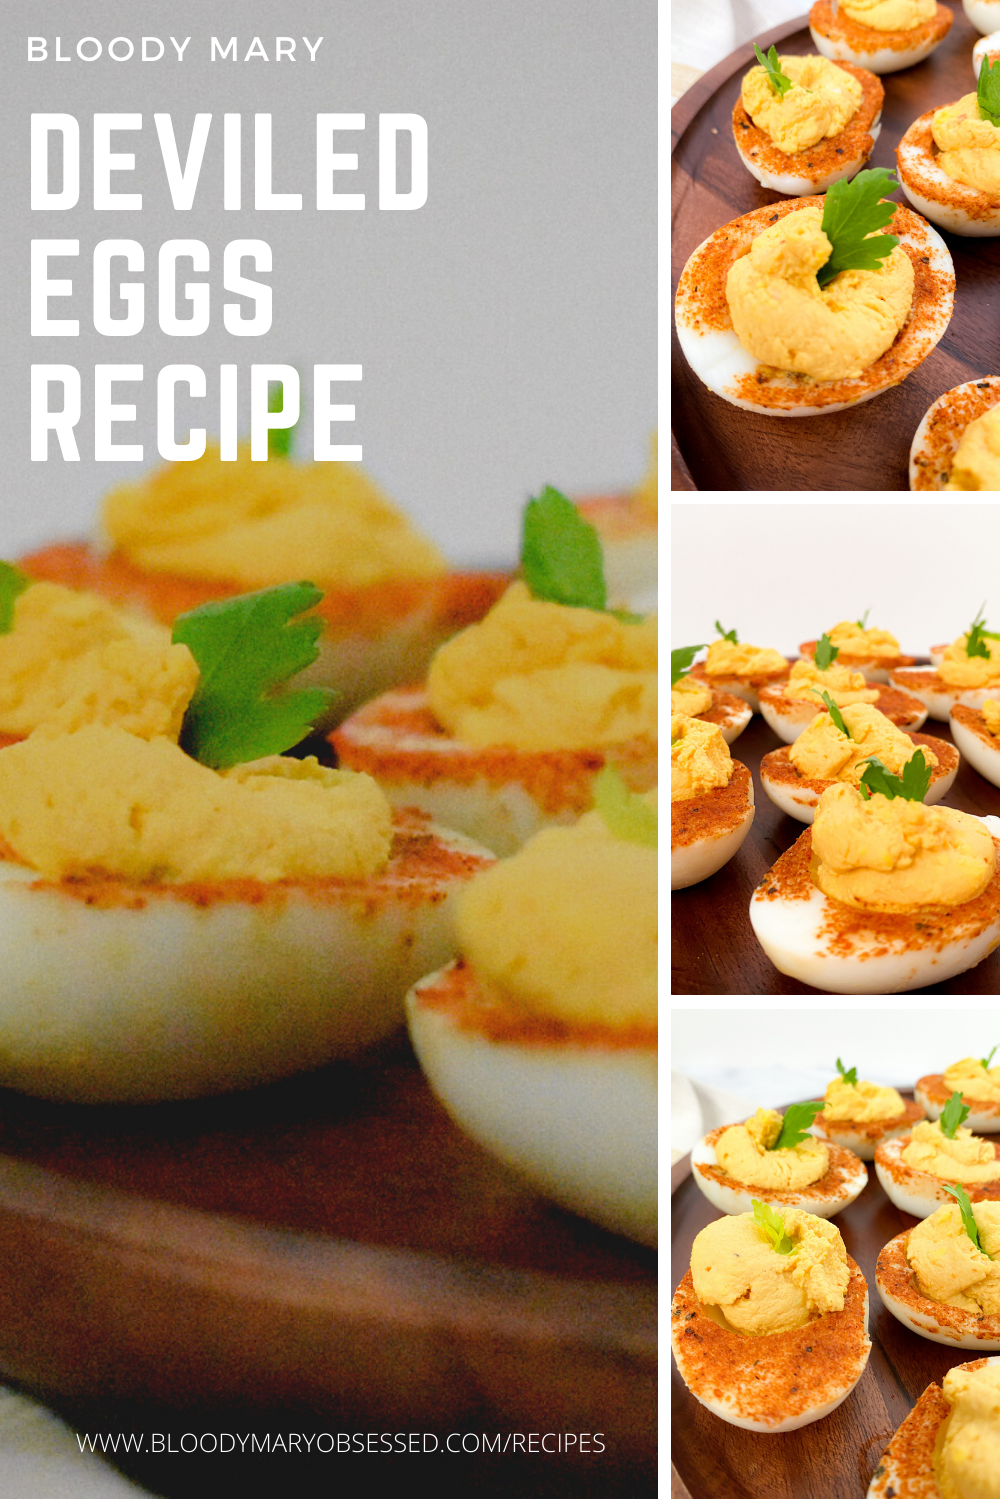 bloody mary deviled eggs recipe bloody mary obsessed easter ideas.png